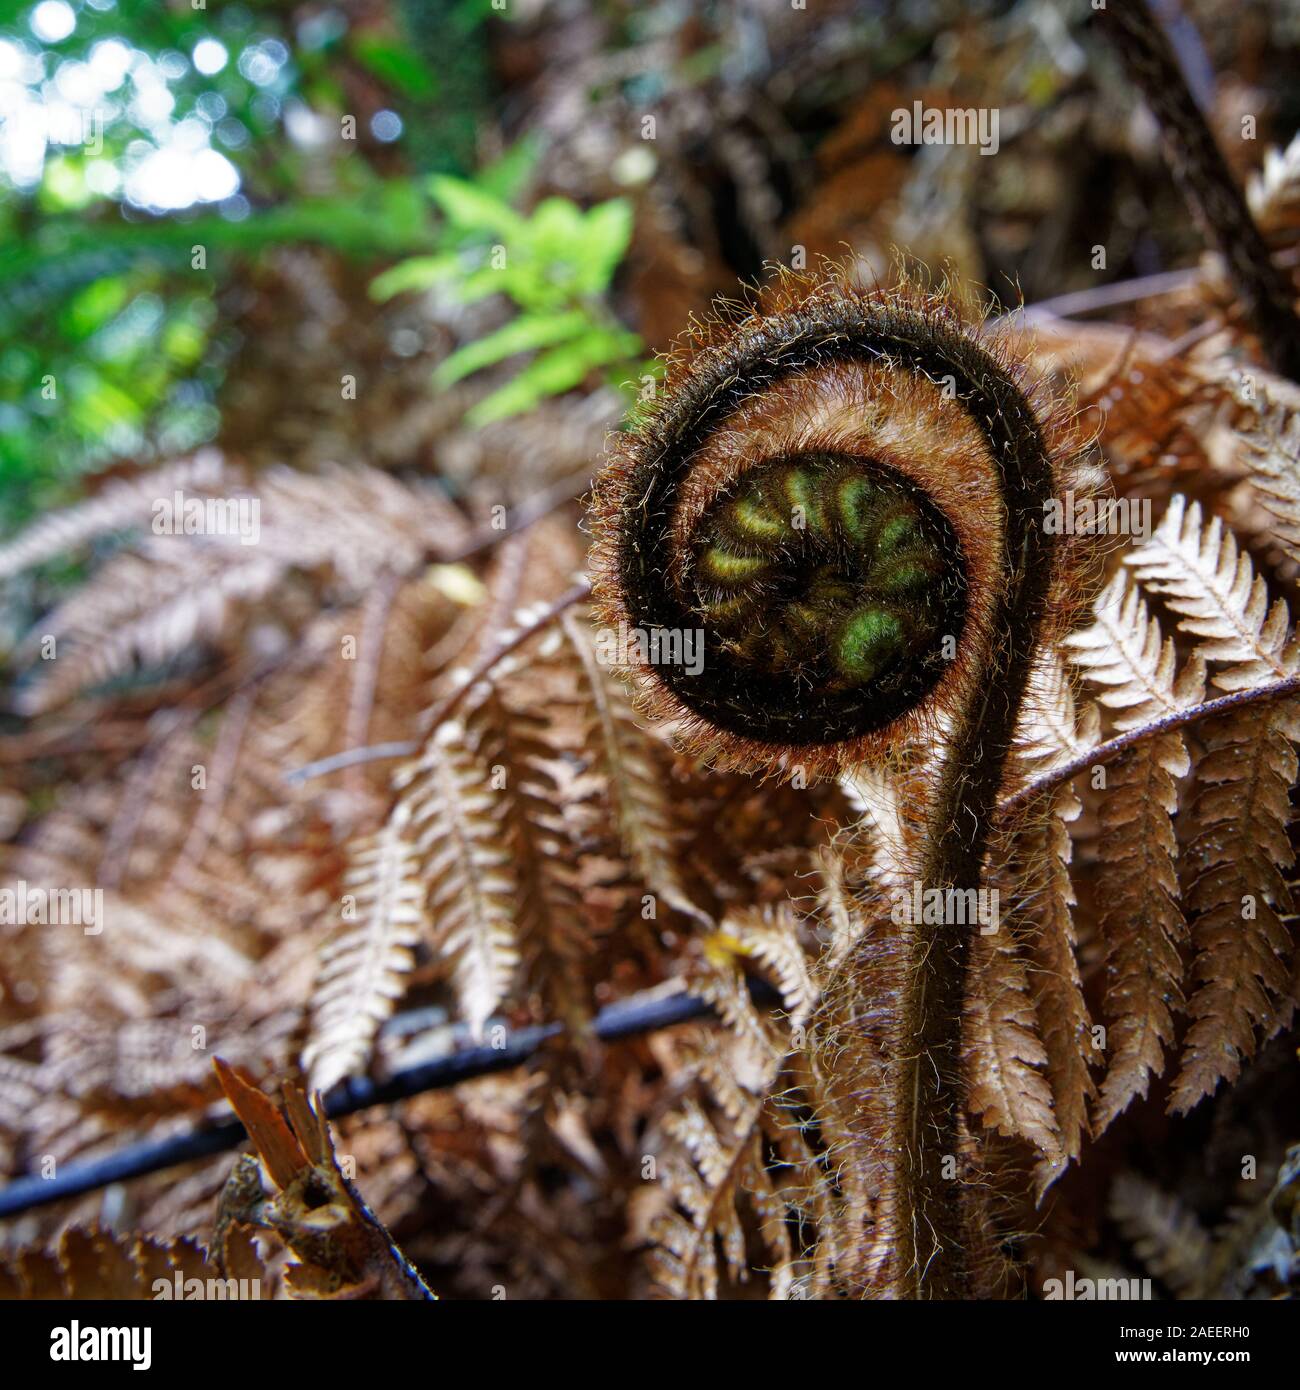 A new fern frond called a koru just starting to unfurl into a new fern leaf, New Zealand. Stock Photo